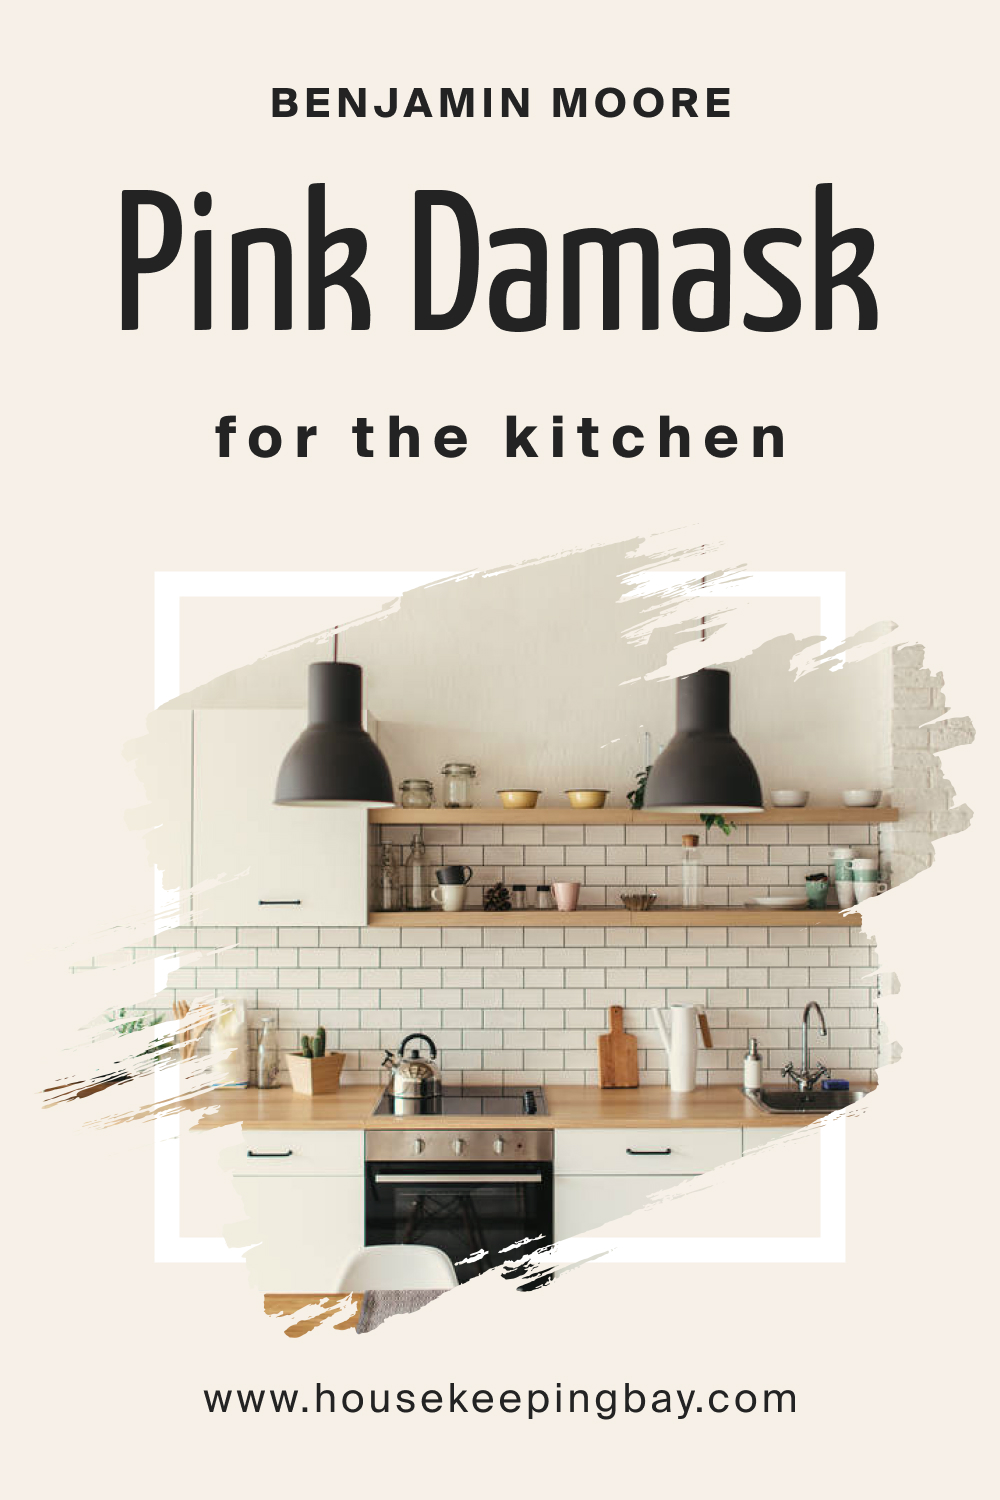 Benjamin Moore. Pink Damask OC 72 for the Kitchen